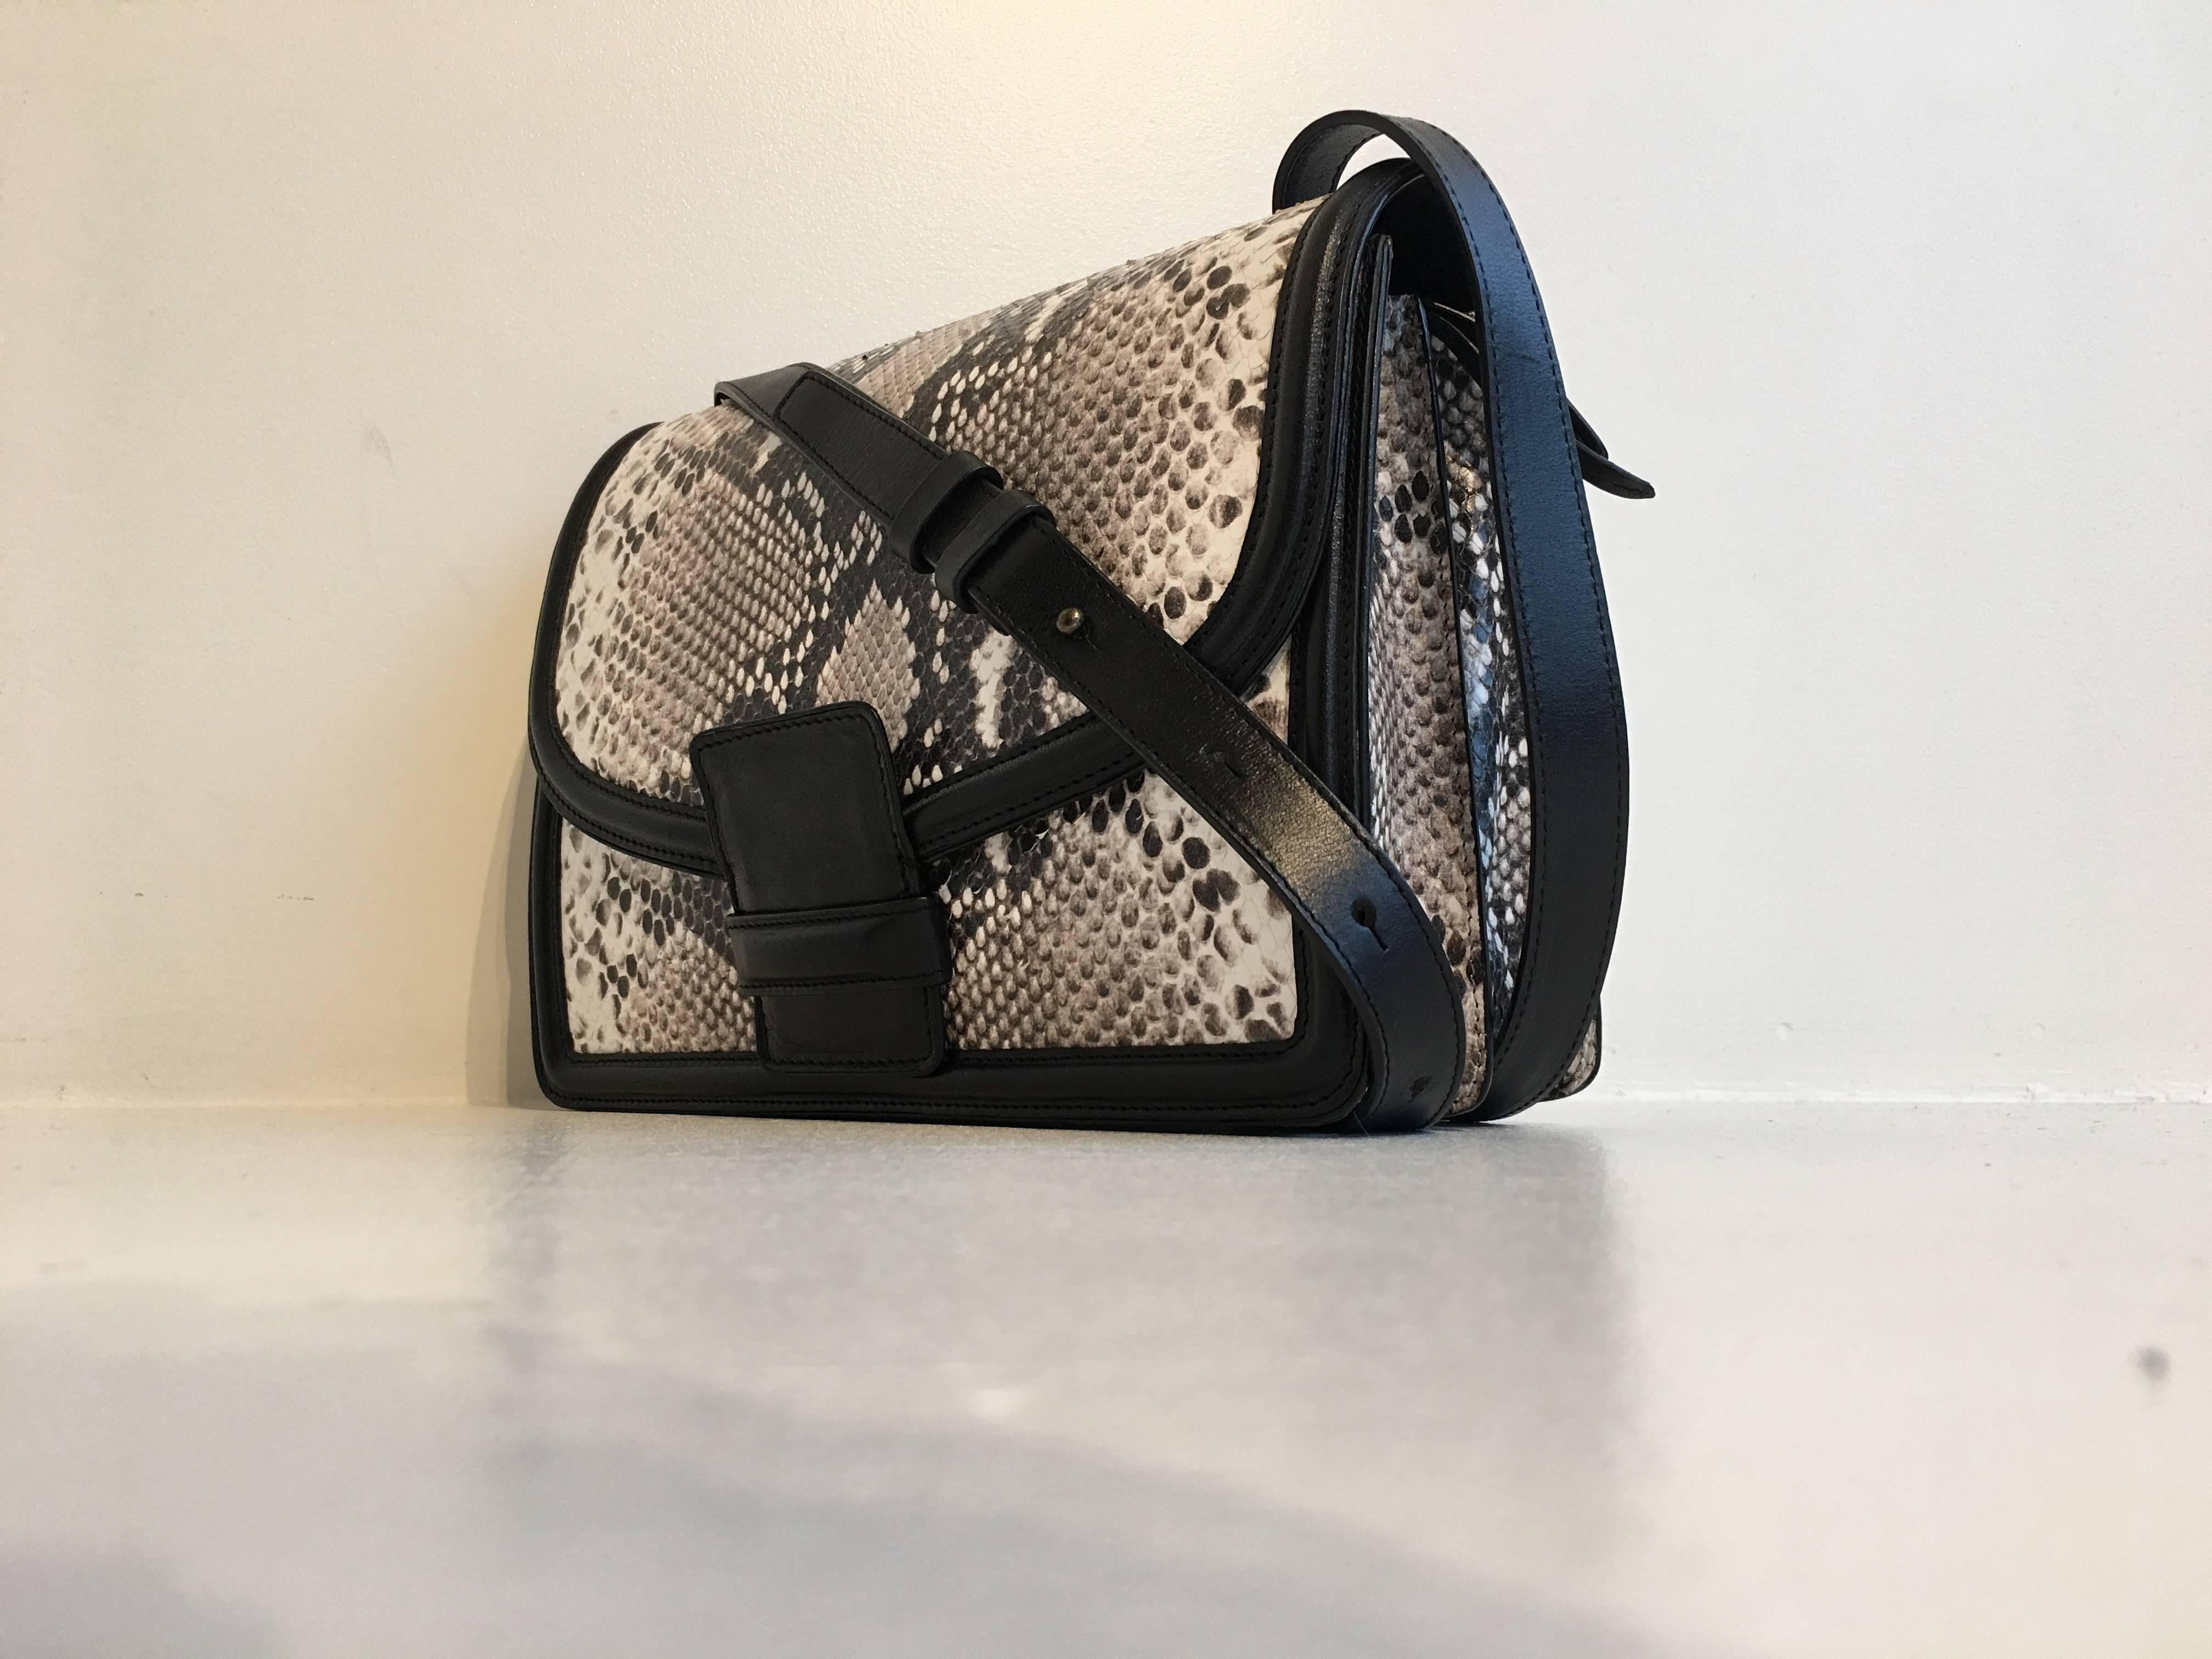 Dries Van Noten black leather and grey snakeskin effect finish purse from the AW16 collection, which was inspired by Marchesa Luisa Casati, an Italian heiress and patroness of the arts. It has a 43 inch long adjustable crossbody strap. The bag has